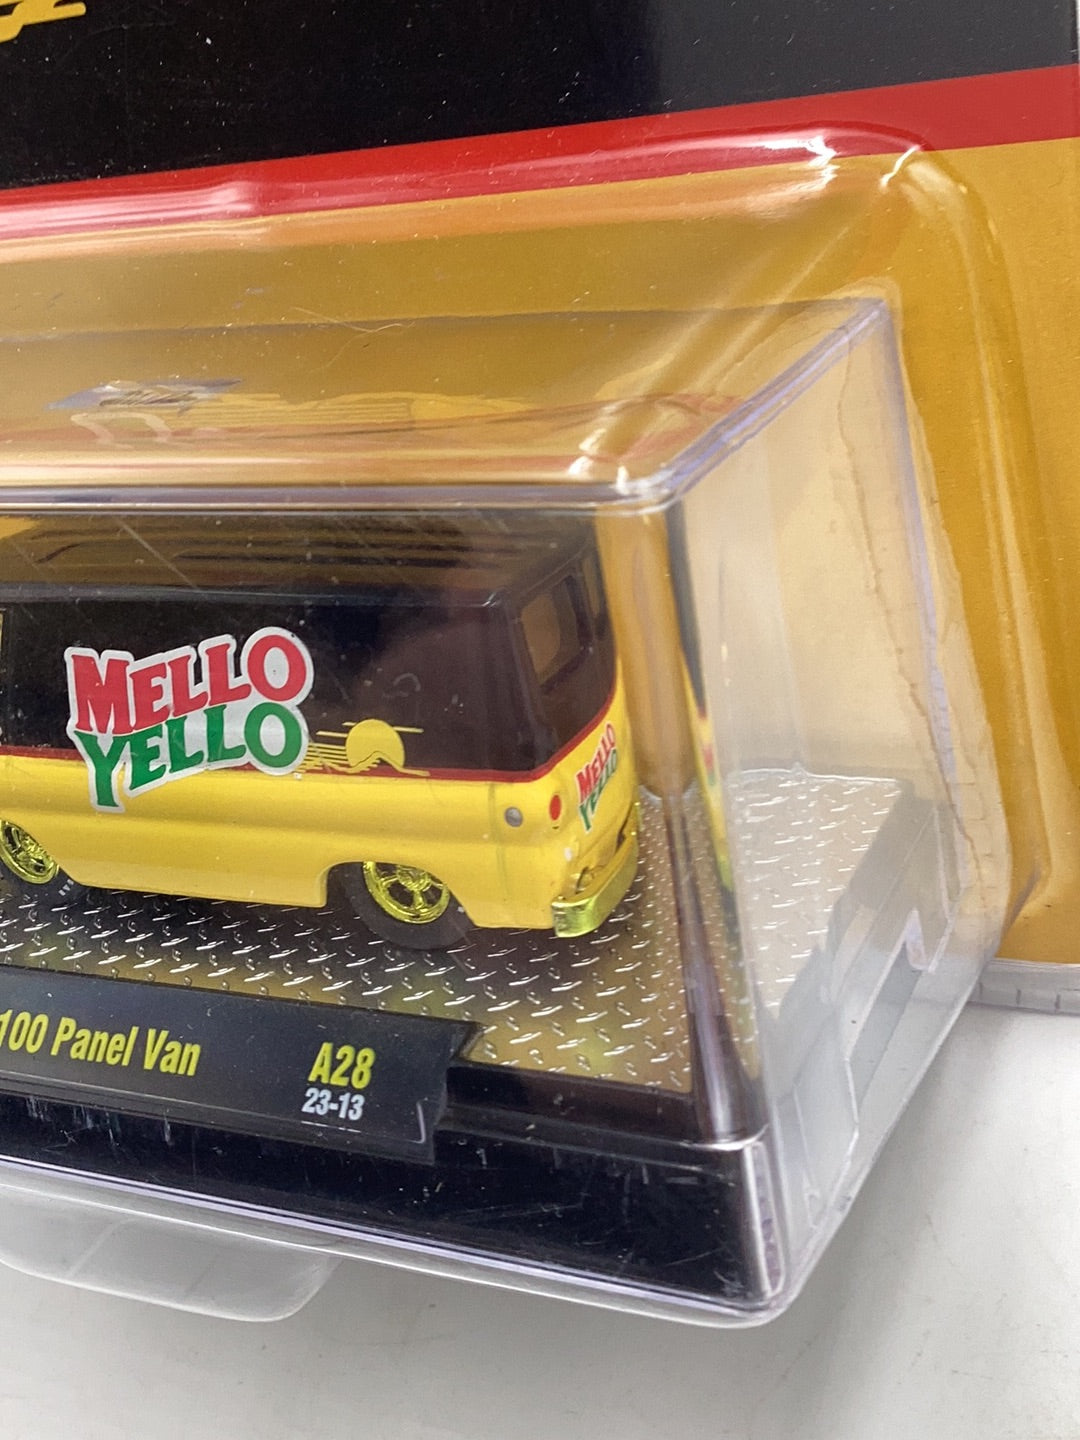 M2 Machines Mello Yellow 1967 Dodge A100 Panel Van A28 CHASE